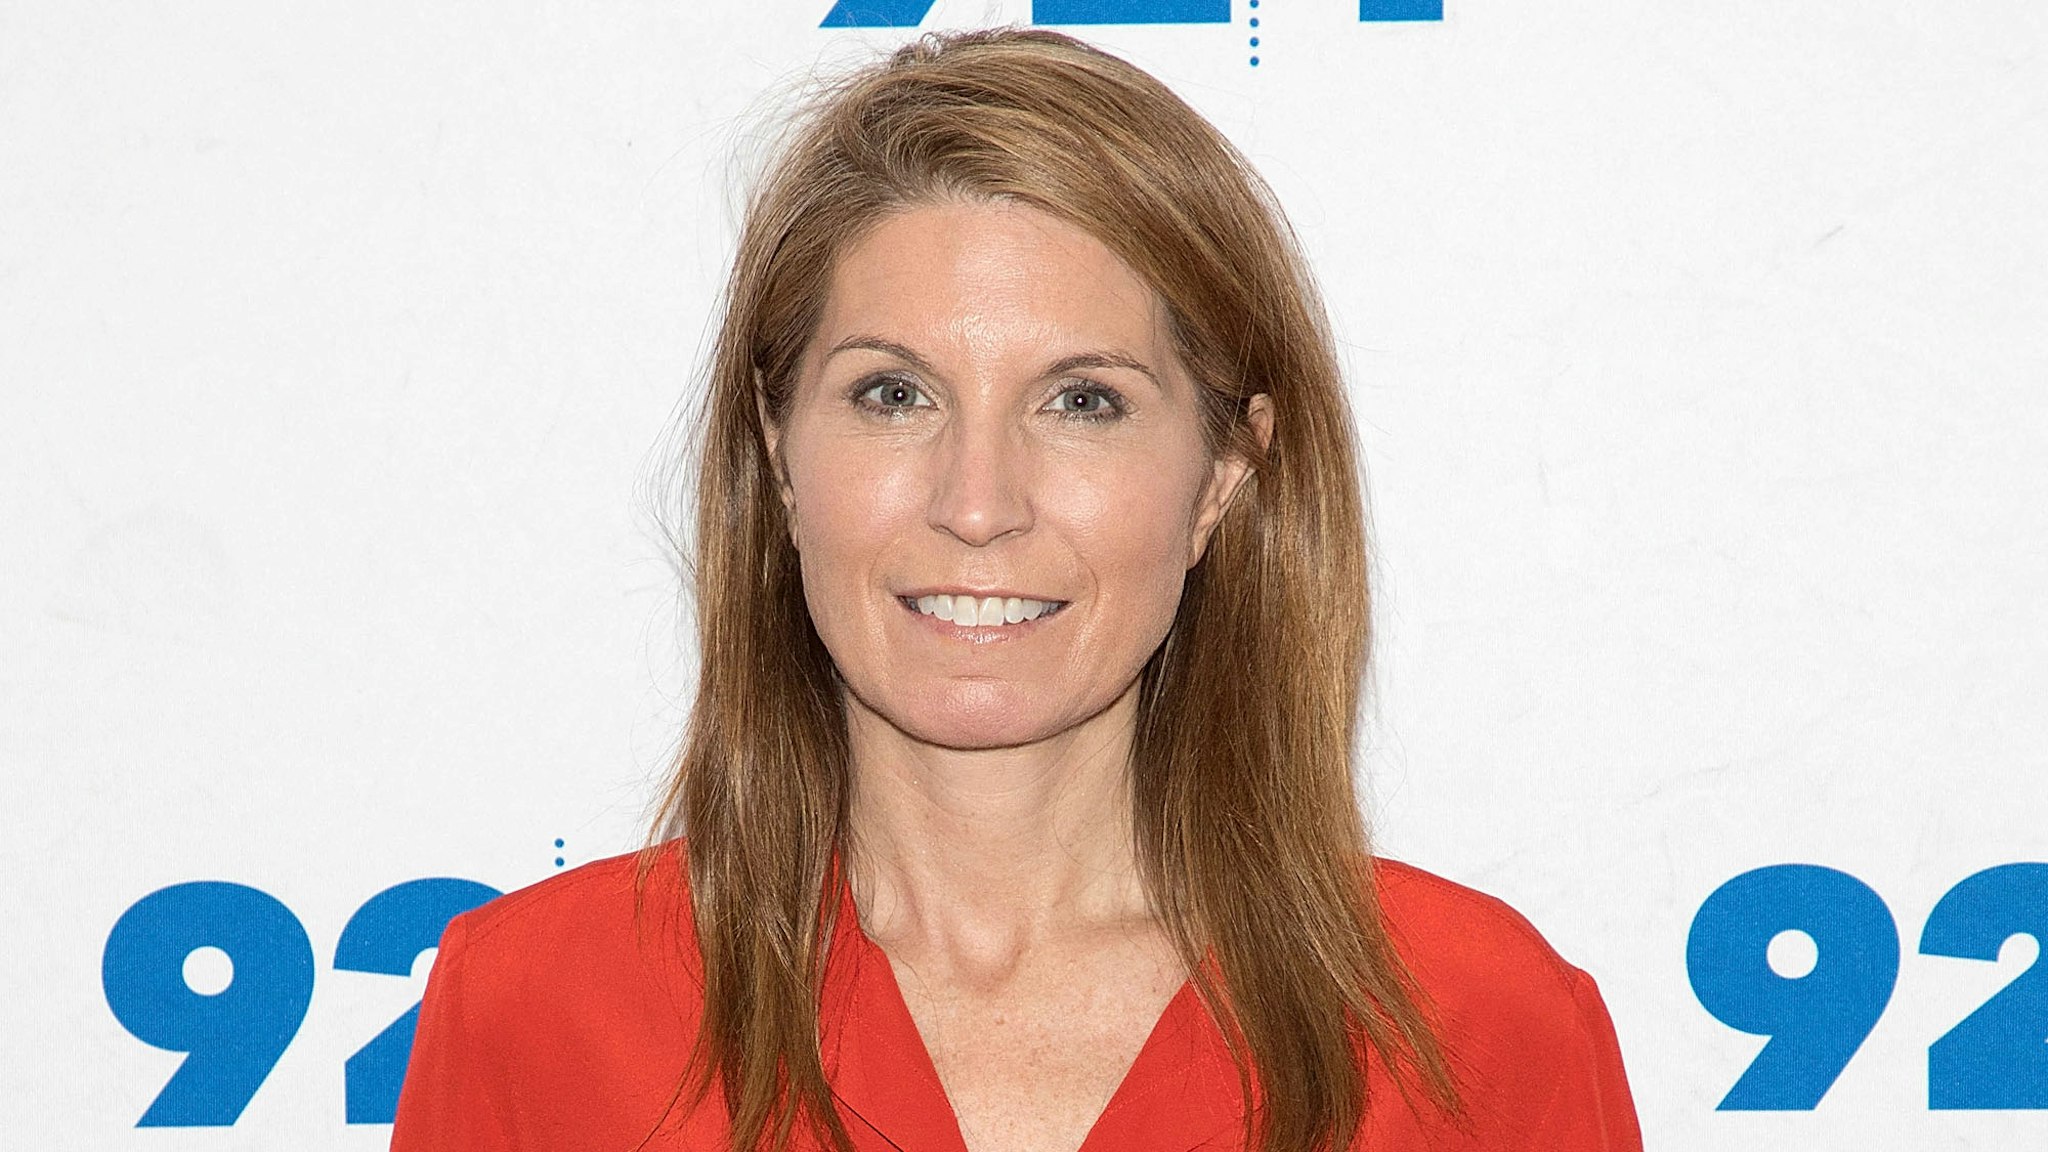 NEW YORK, NY - DECEMBER 09: Nicolle Wallace attends "James Comey in Conversation with Nicolle Wallace" at 92nd Street Y on December 9, 2018 in New York City.